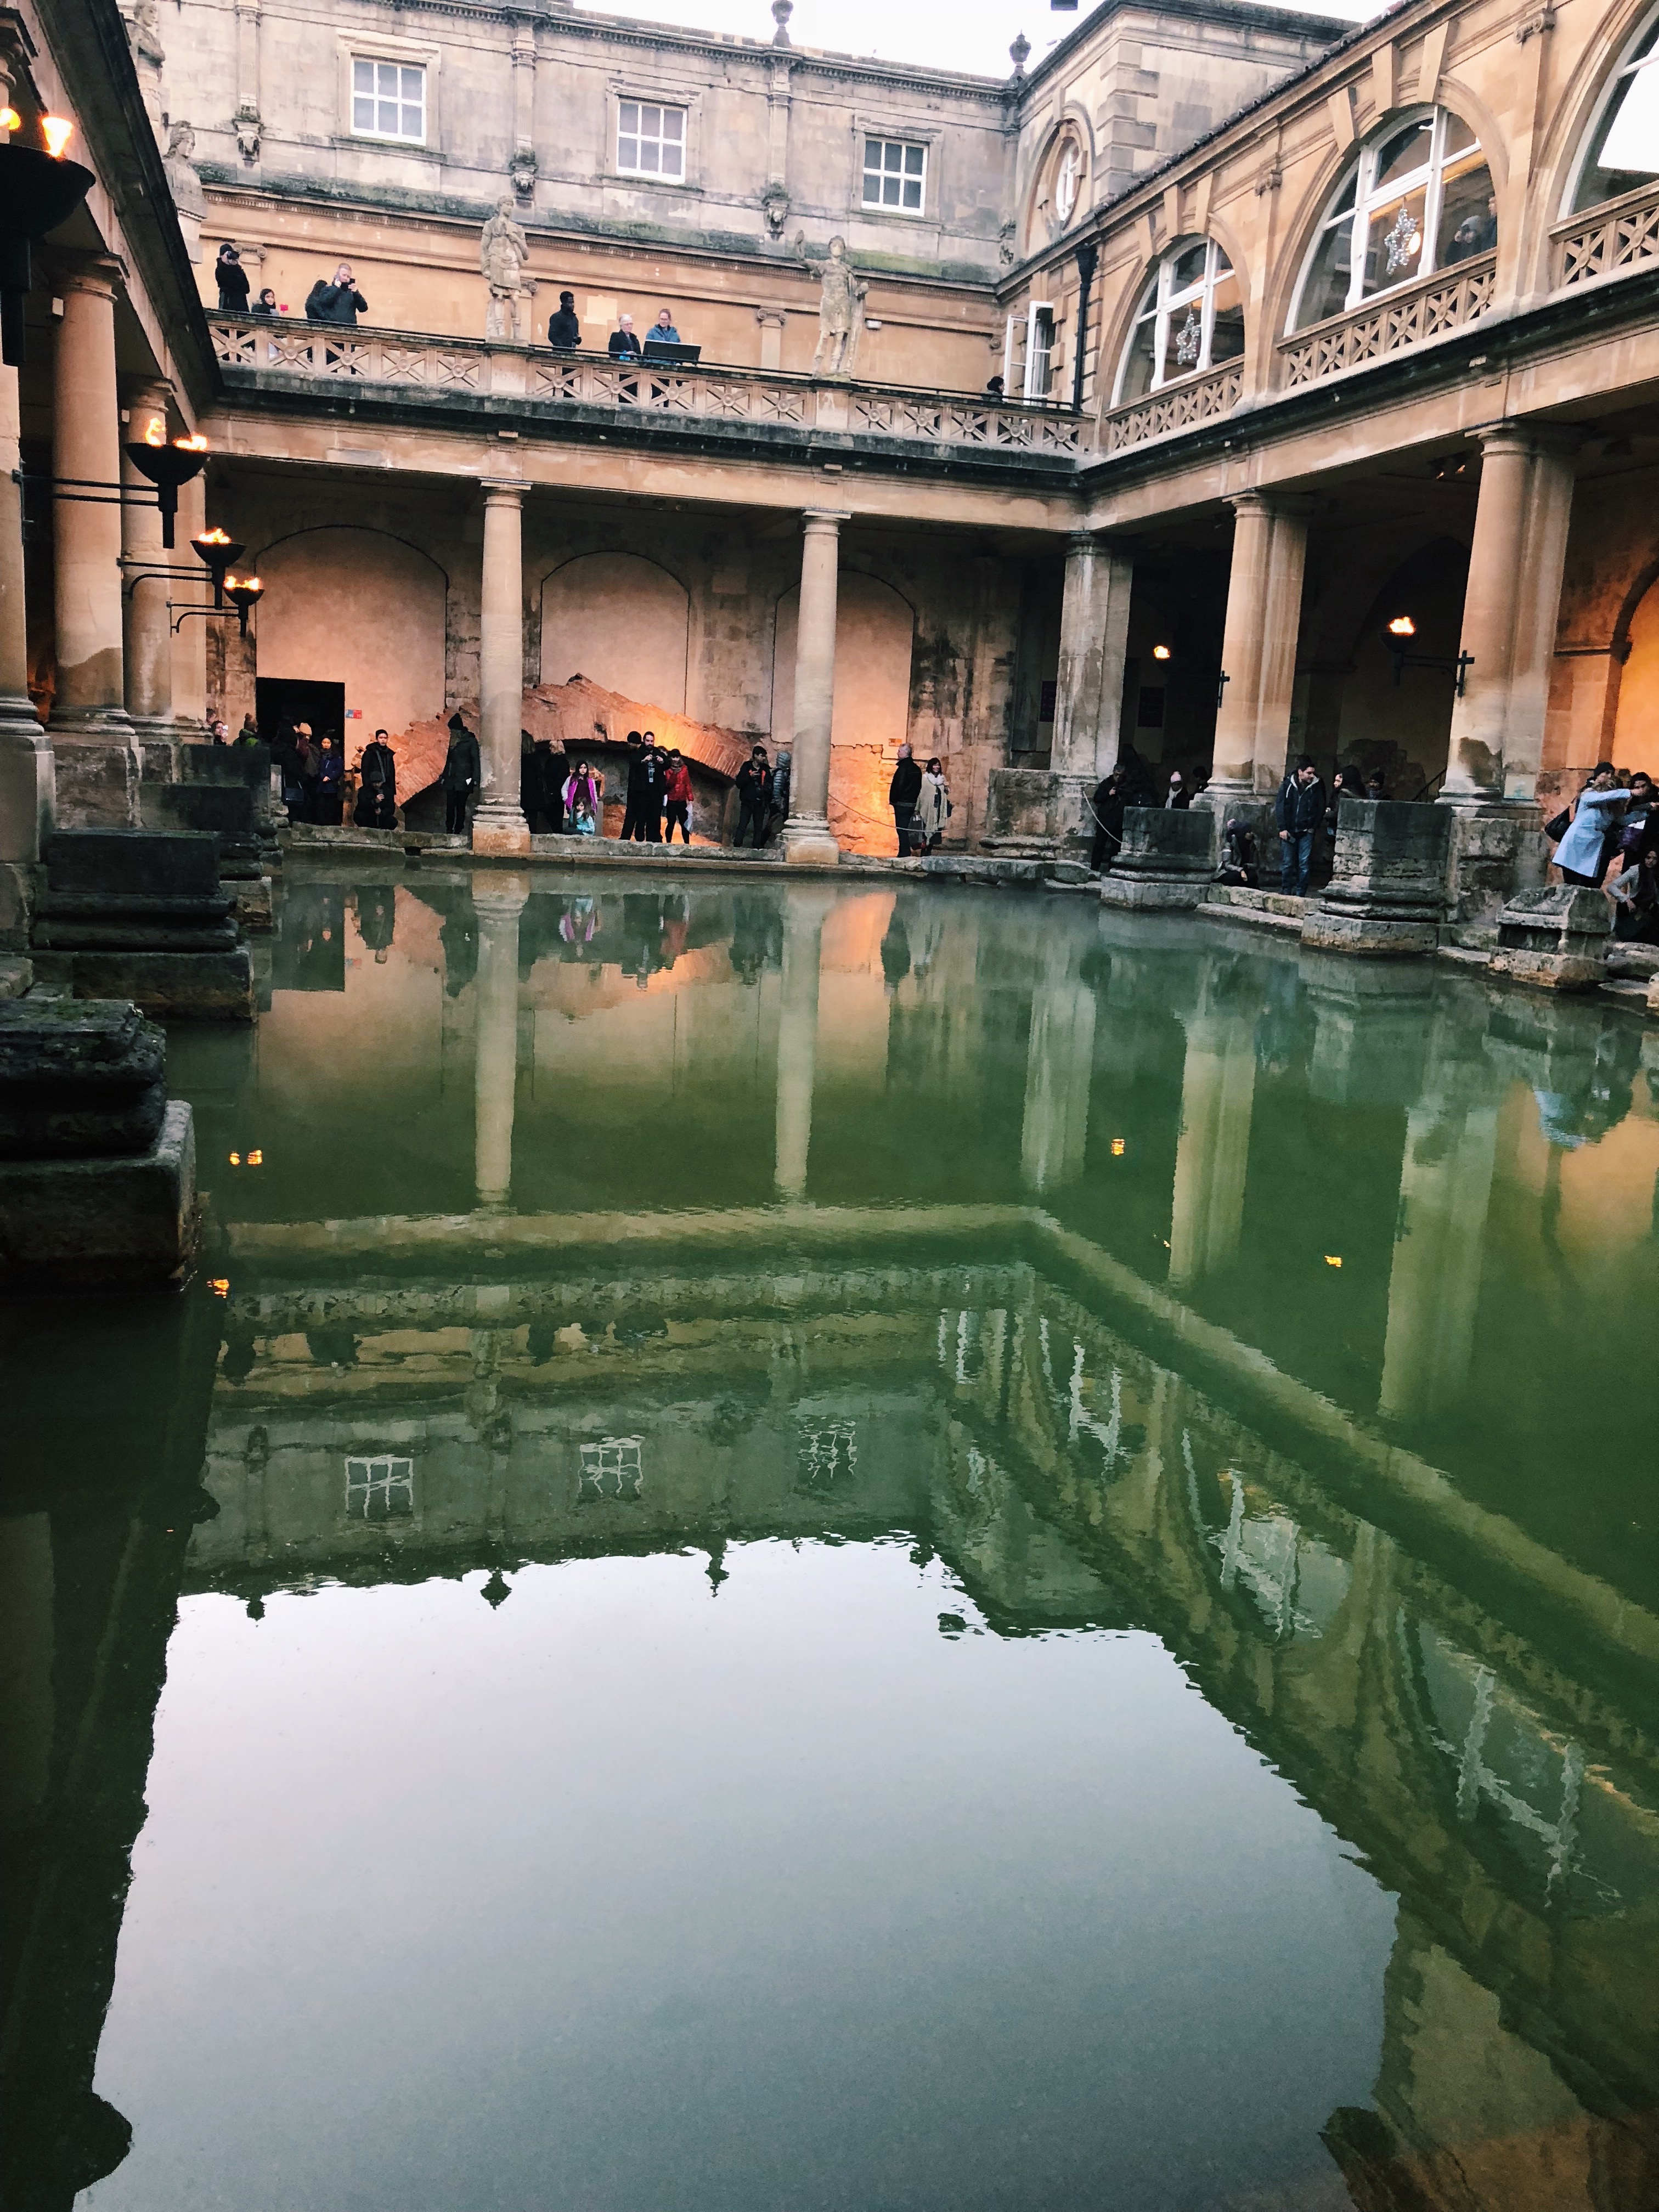 VISITING THE CITY OF BATH